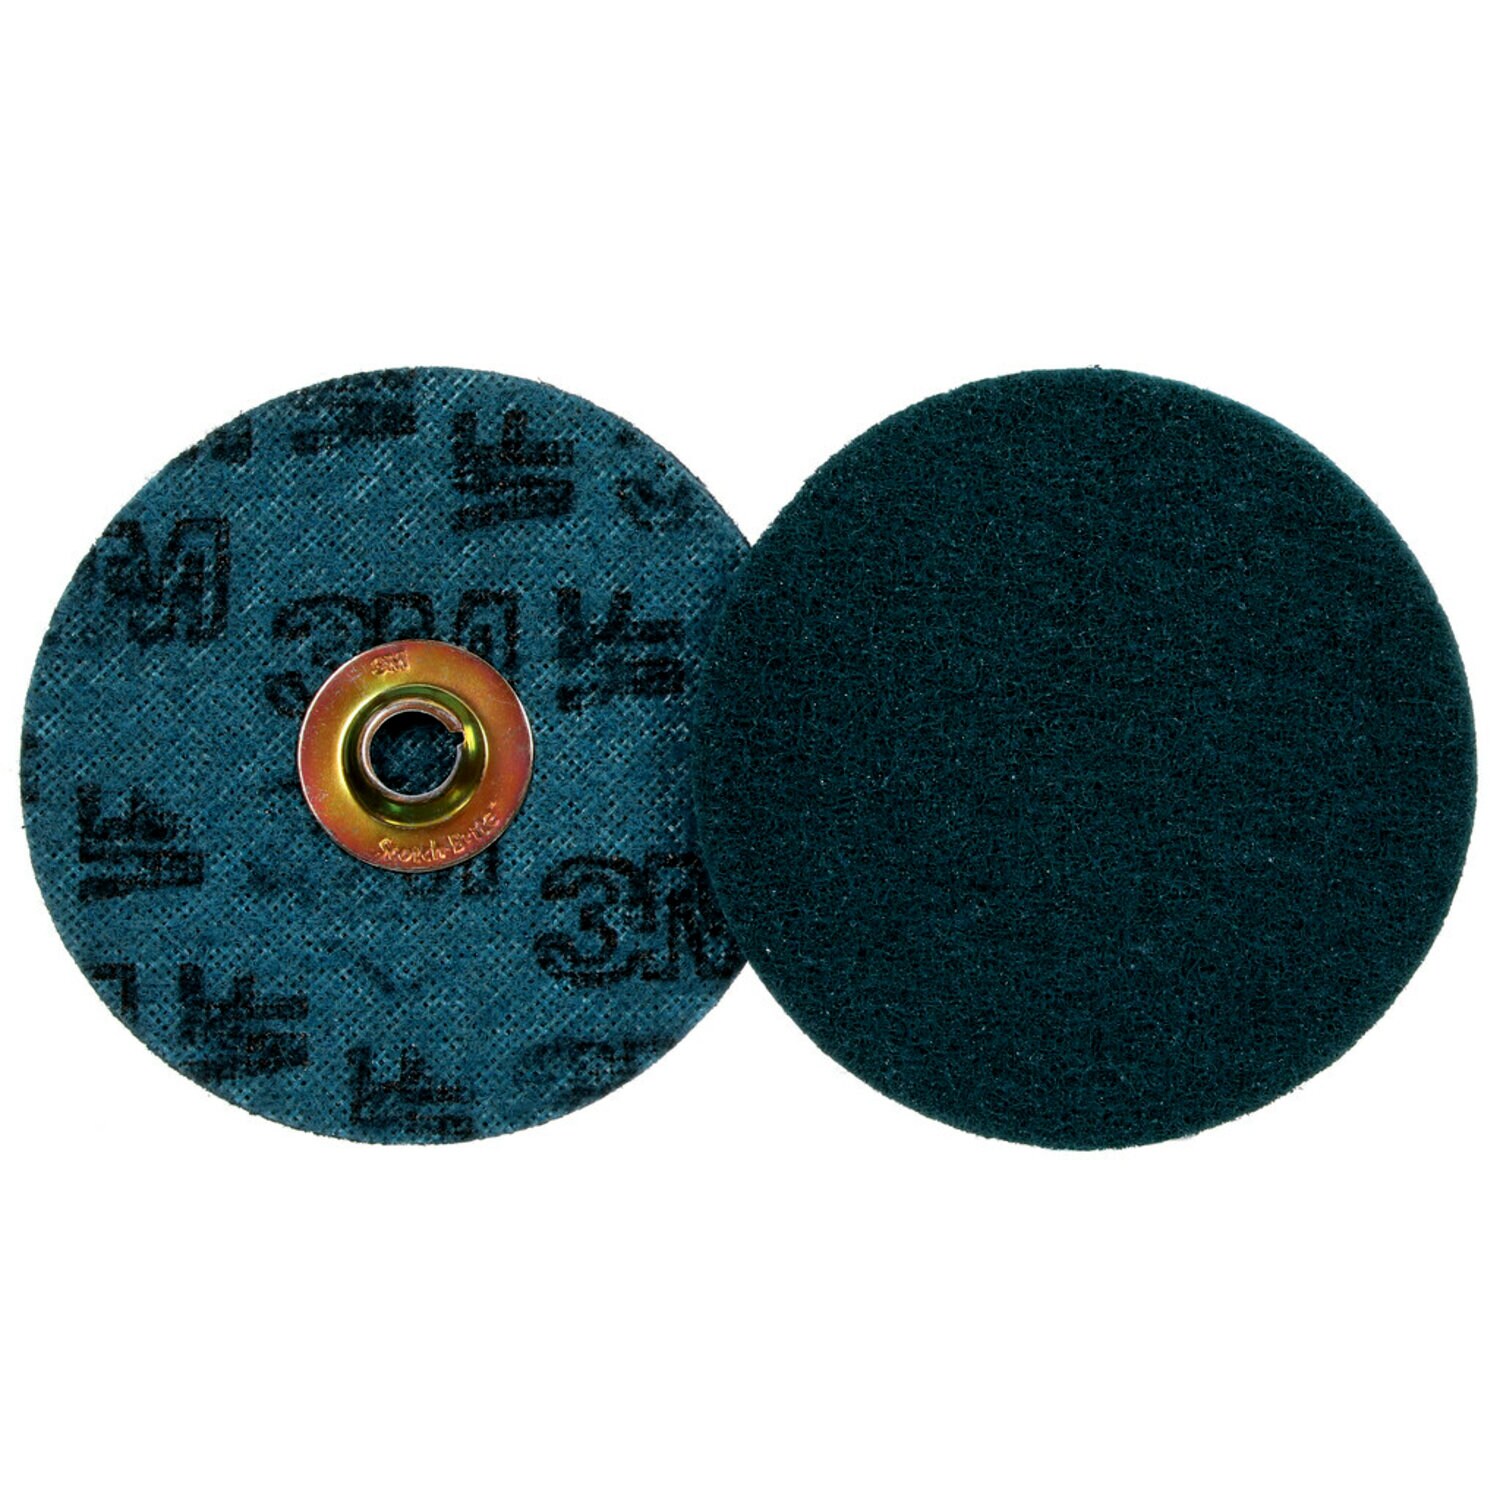 7000120813 - Scotch-Brite Surface Conditioning TN Quick Change Disc, SC-DN, A/O Very
Fine, 5 in, 50 ea/Case